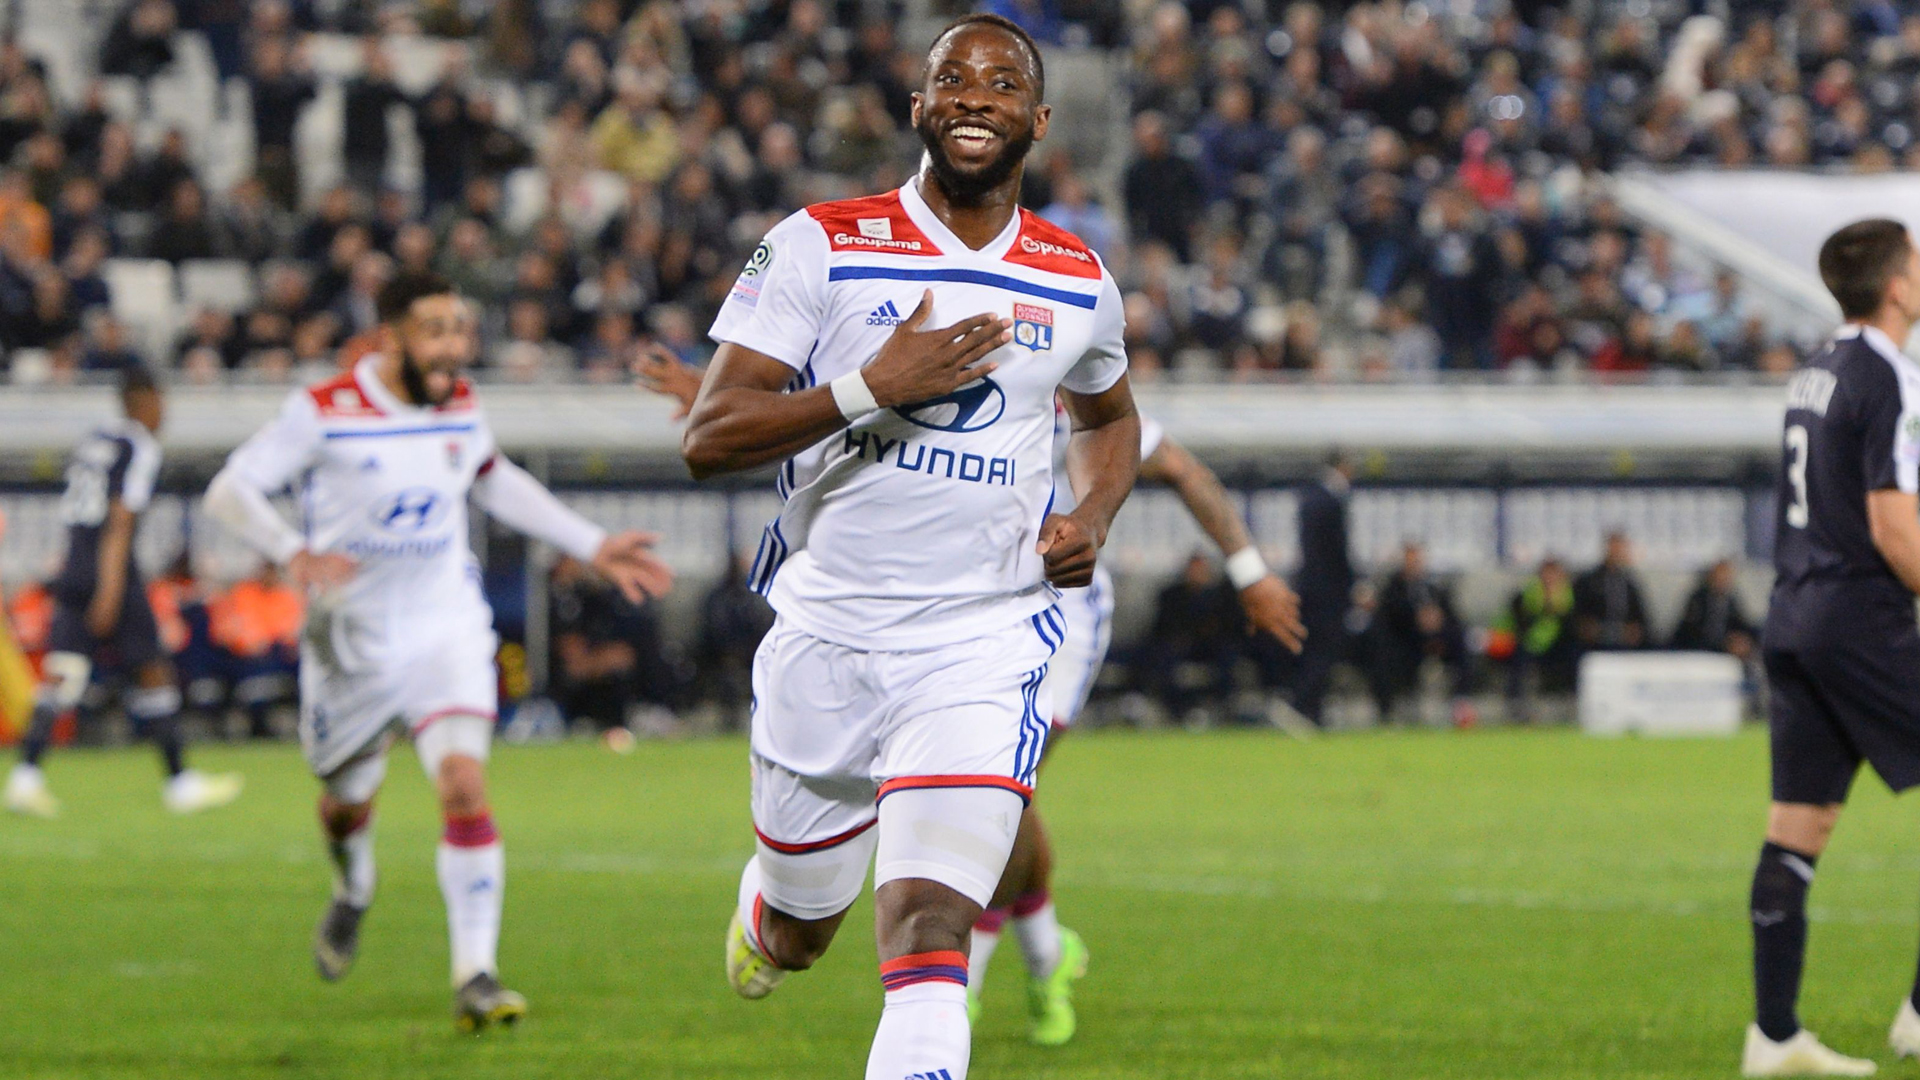 Manchester United are among the clubs linked with a move for Lyon striker Moussa Dembele in the January window.